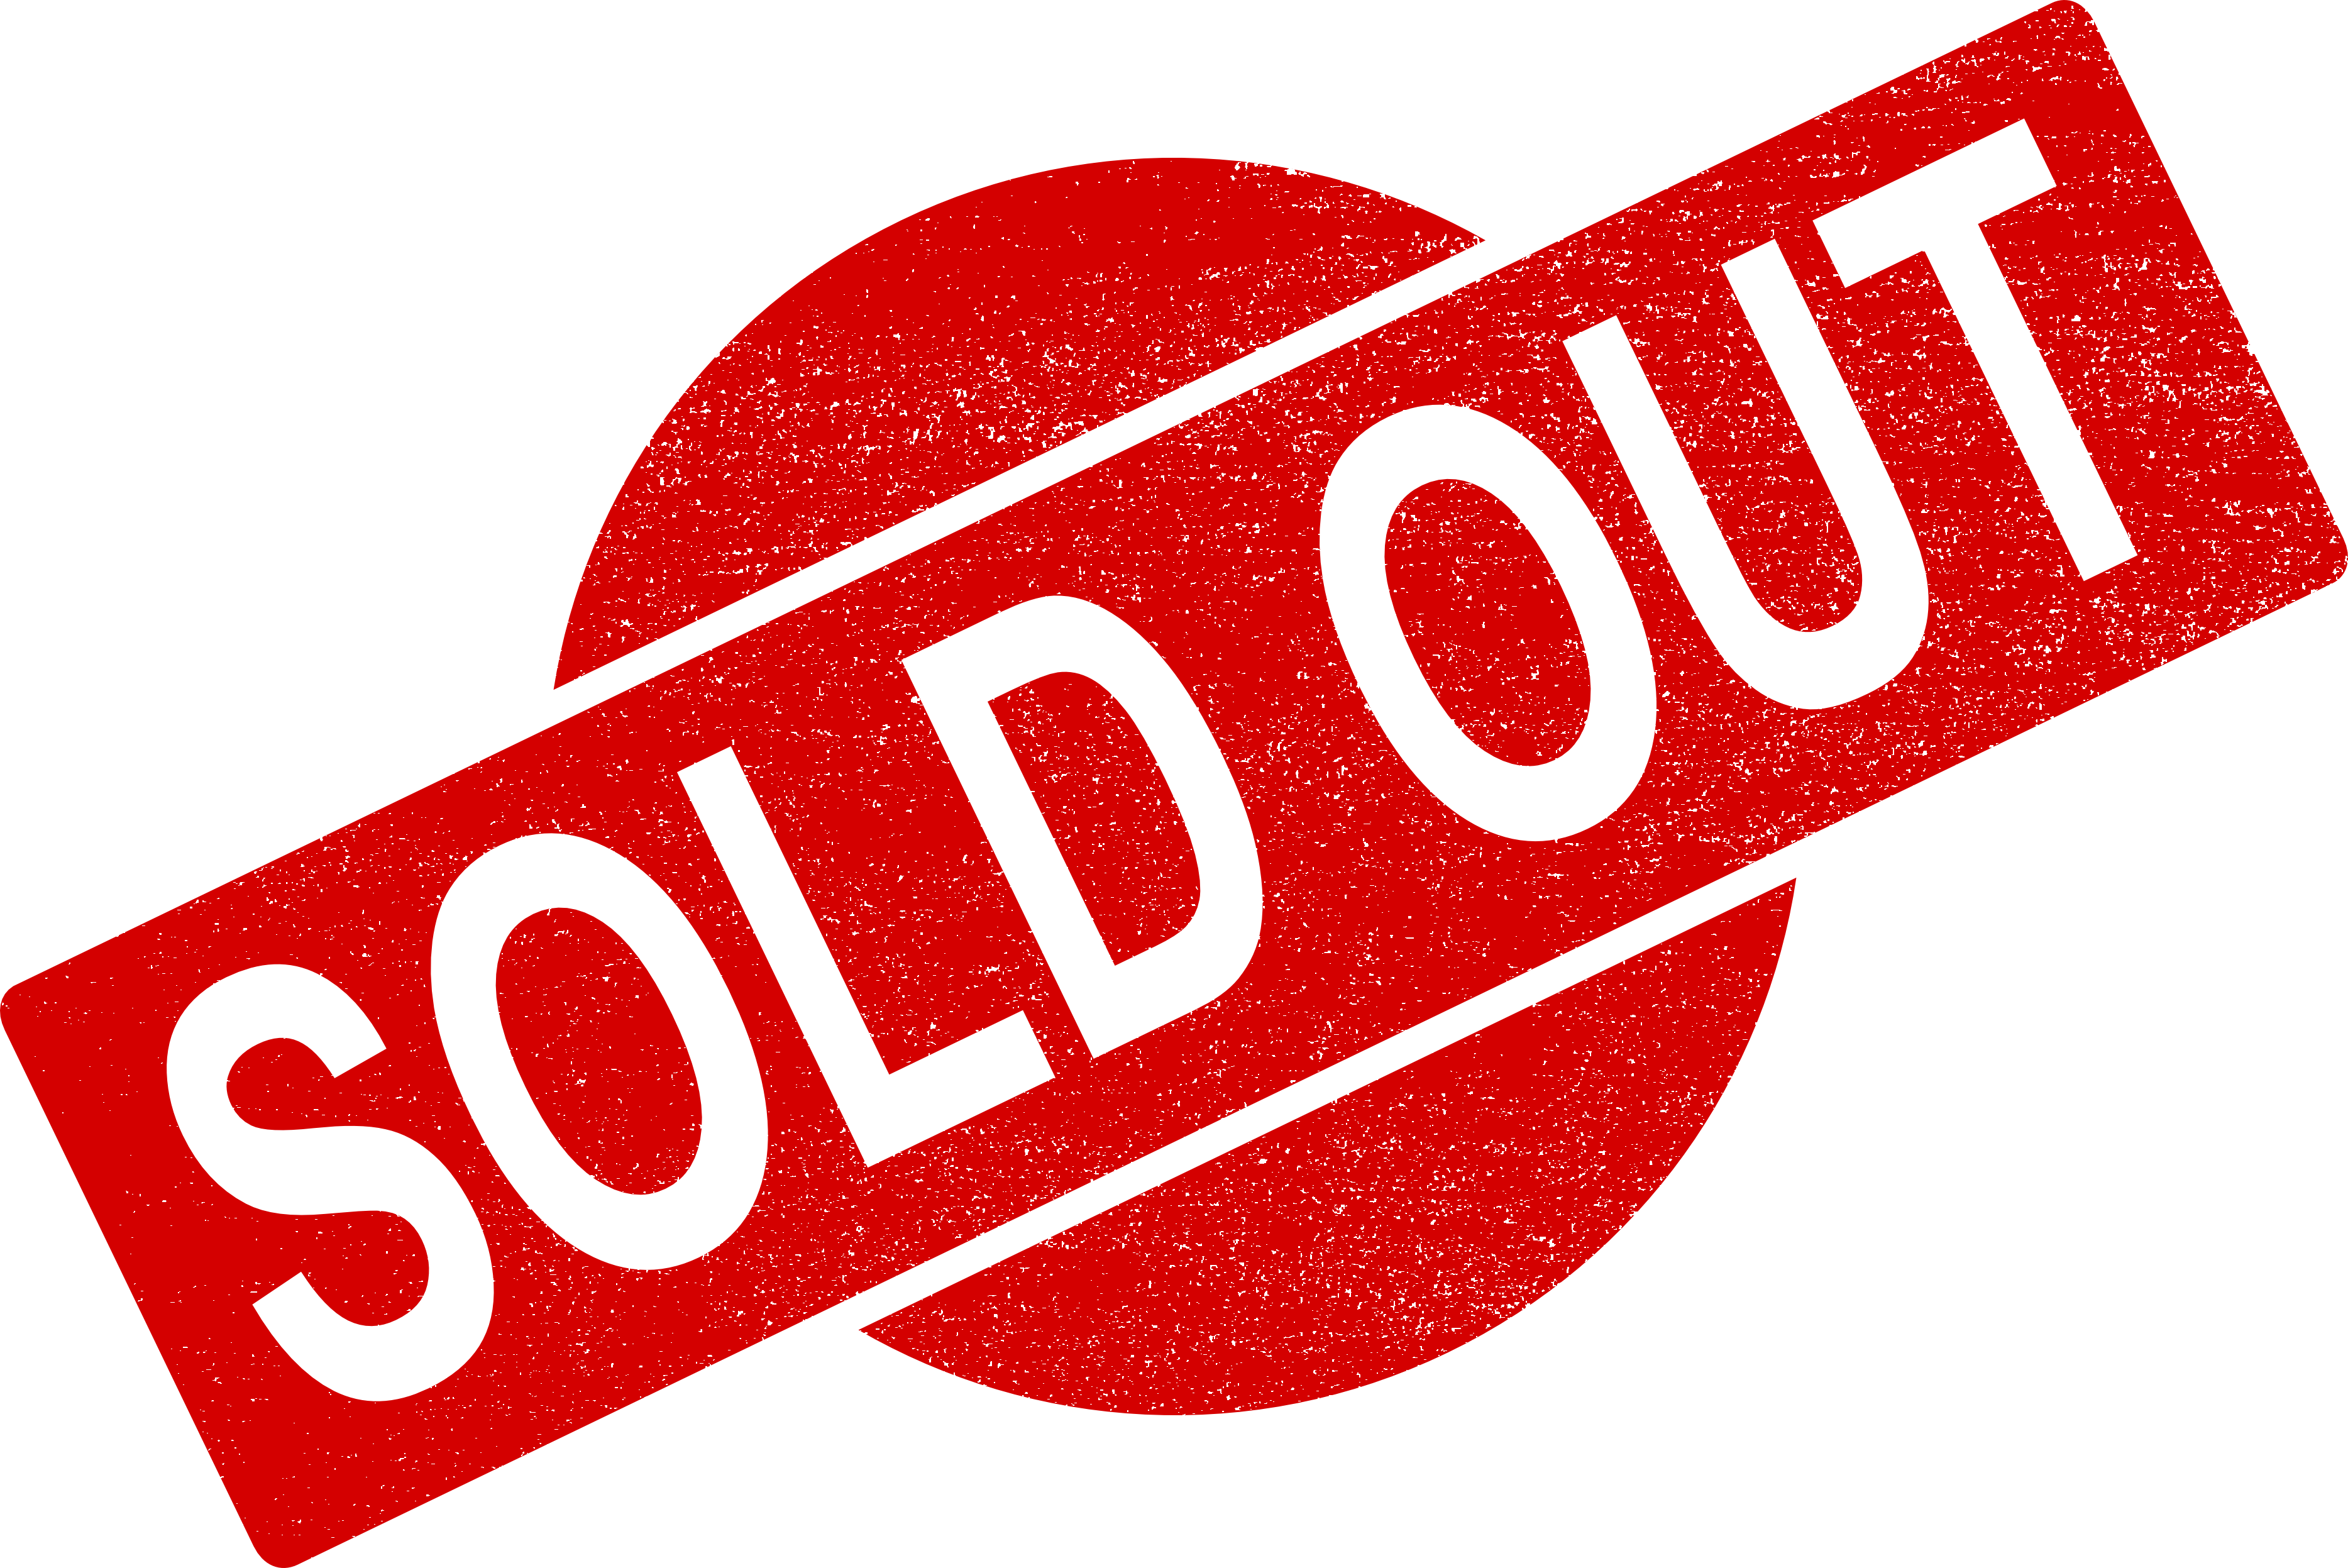 Sold out PNG transparent image download, size: 3735x2494px